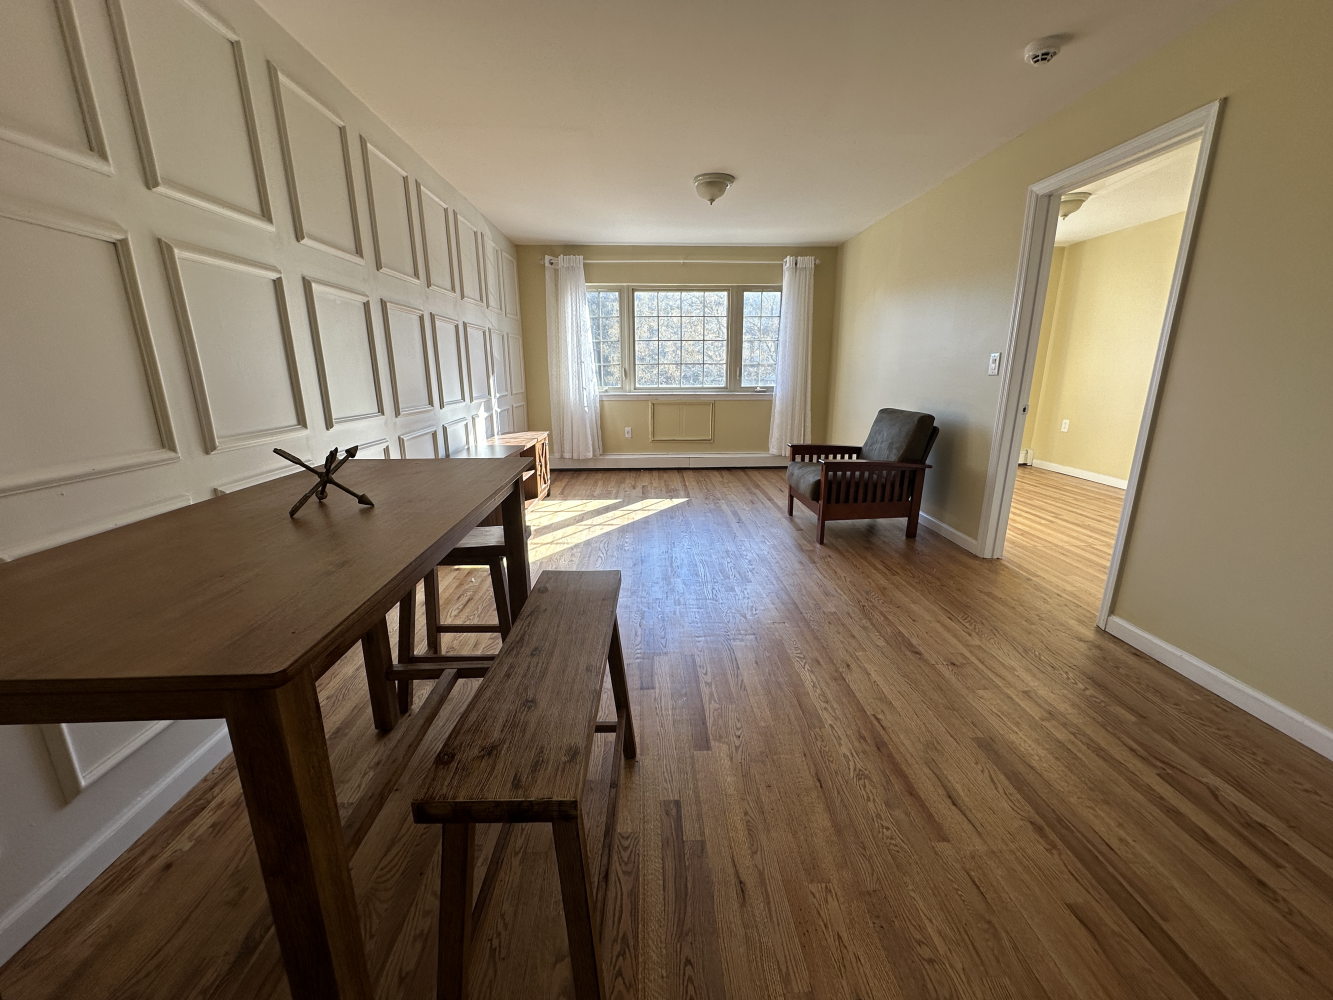 a view of a livingroom with furniture and hardwood floor